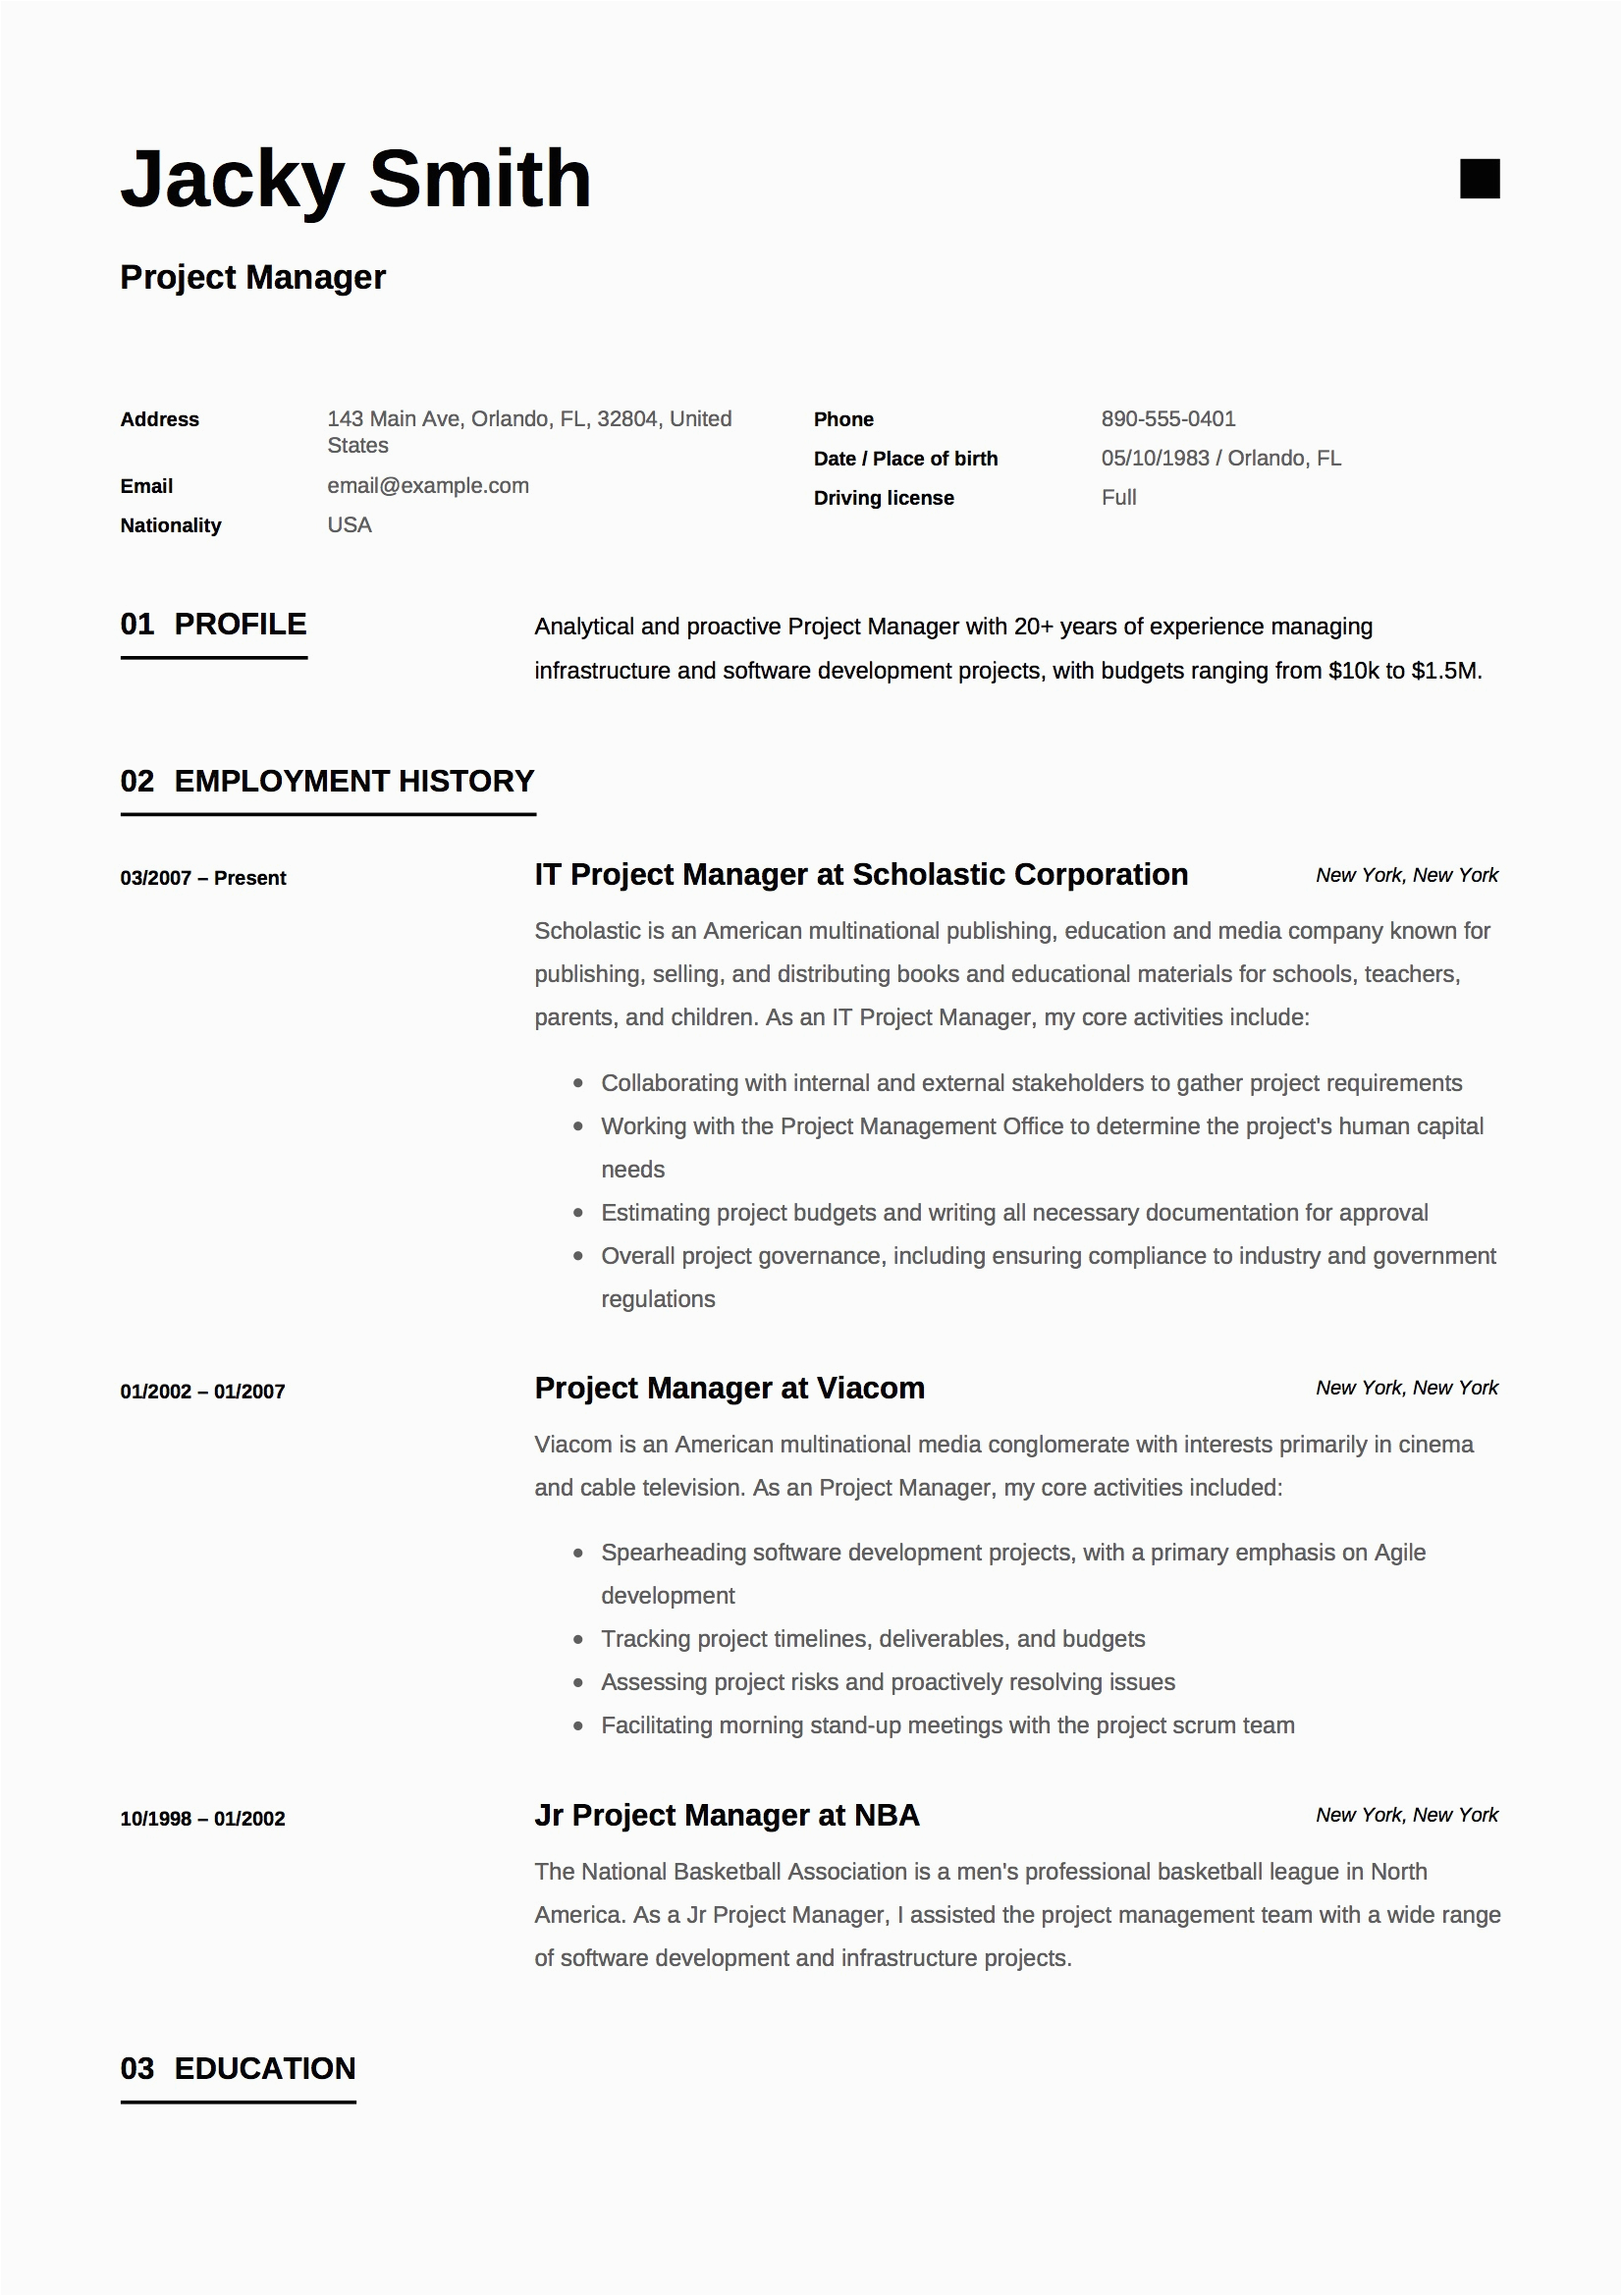 Project Manager Job Description Sample Resume Project Manager Resume & Full Guide